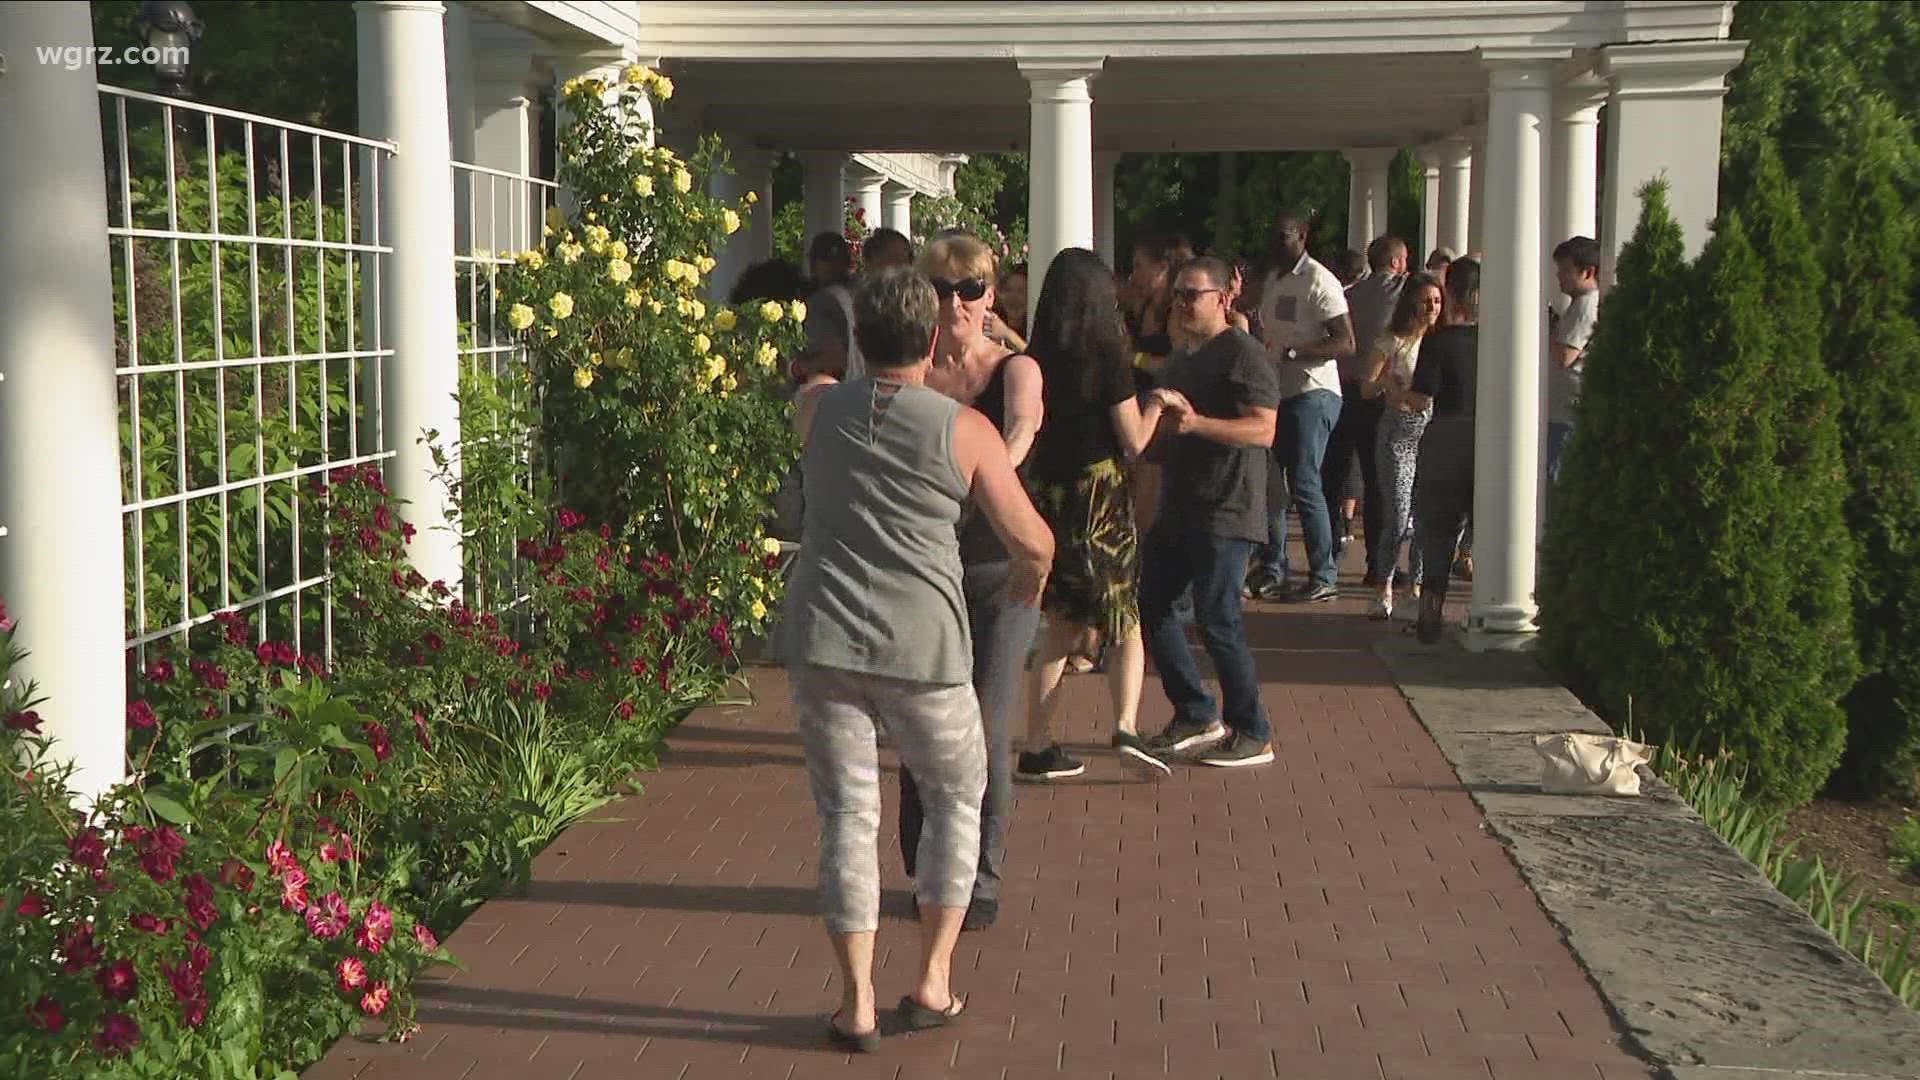 Dozens of people gathered at the rose gardens pavilion tonight to embrace their inner dancer.